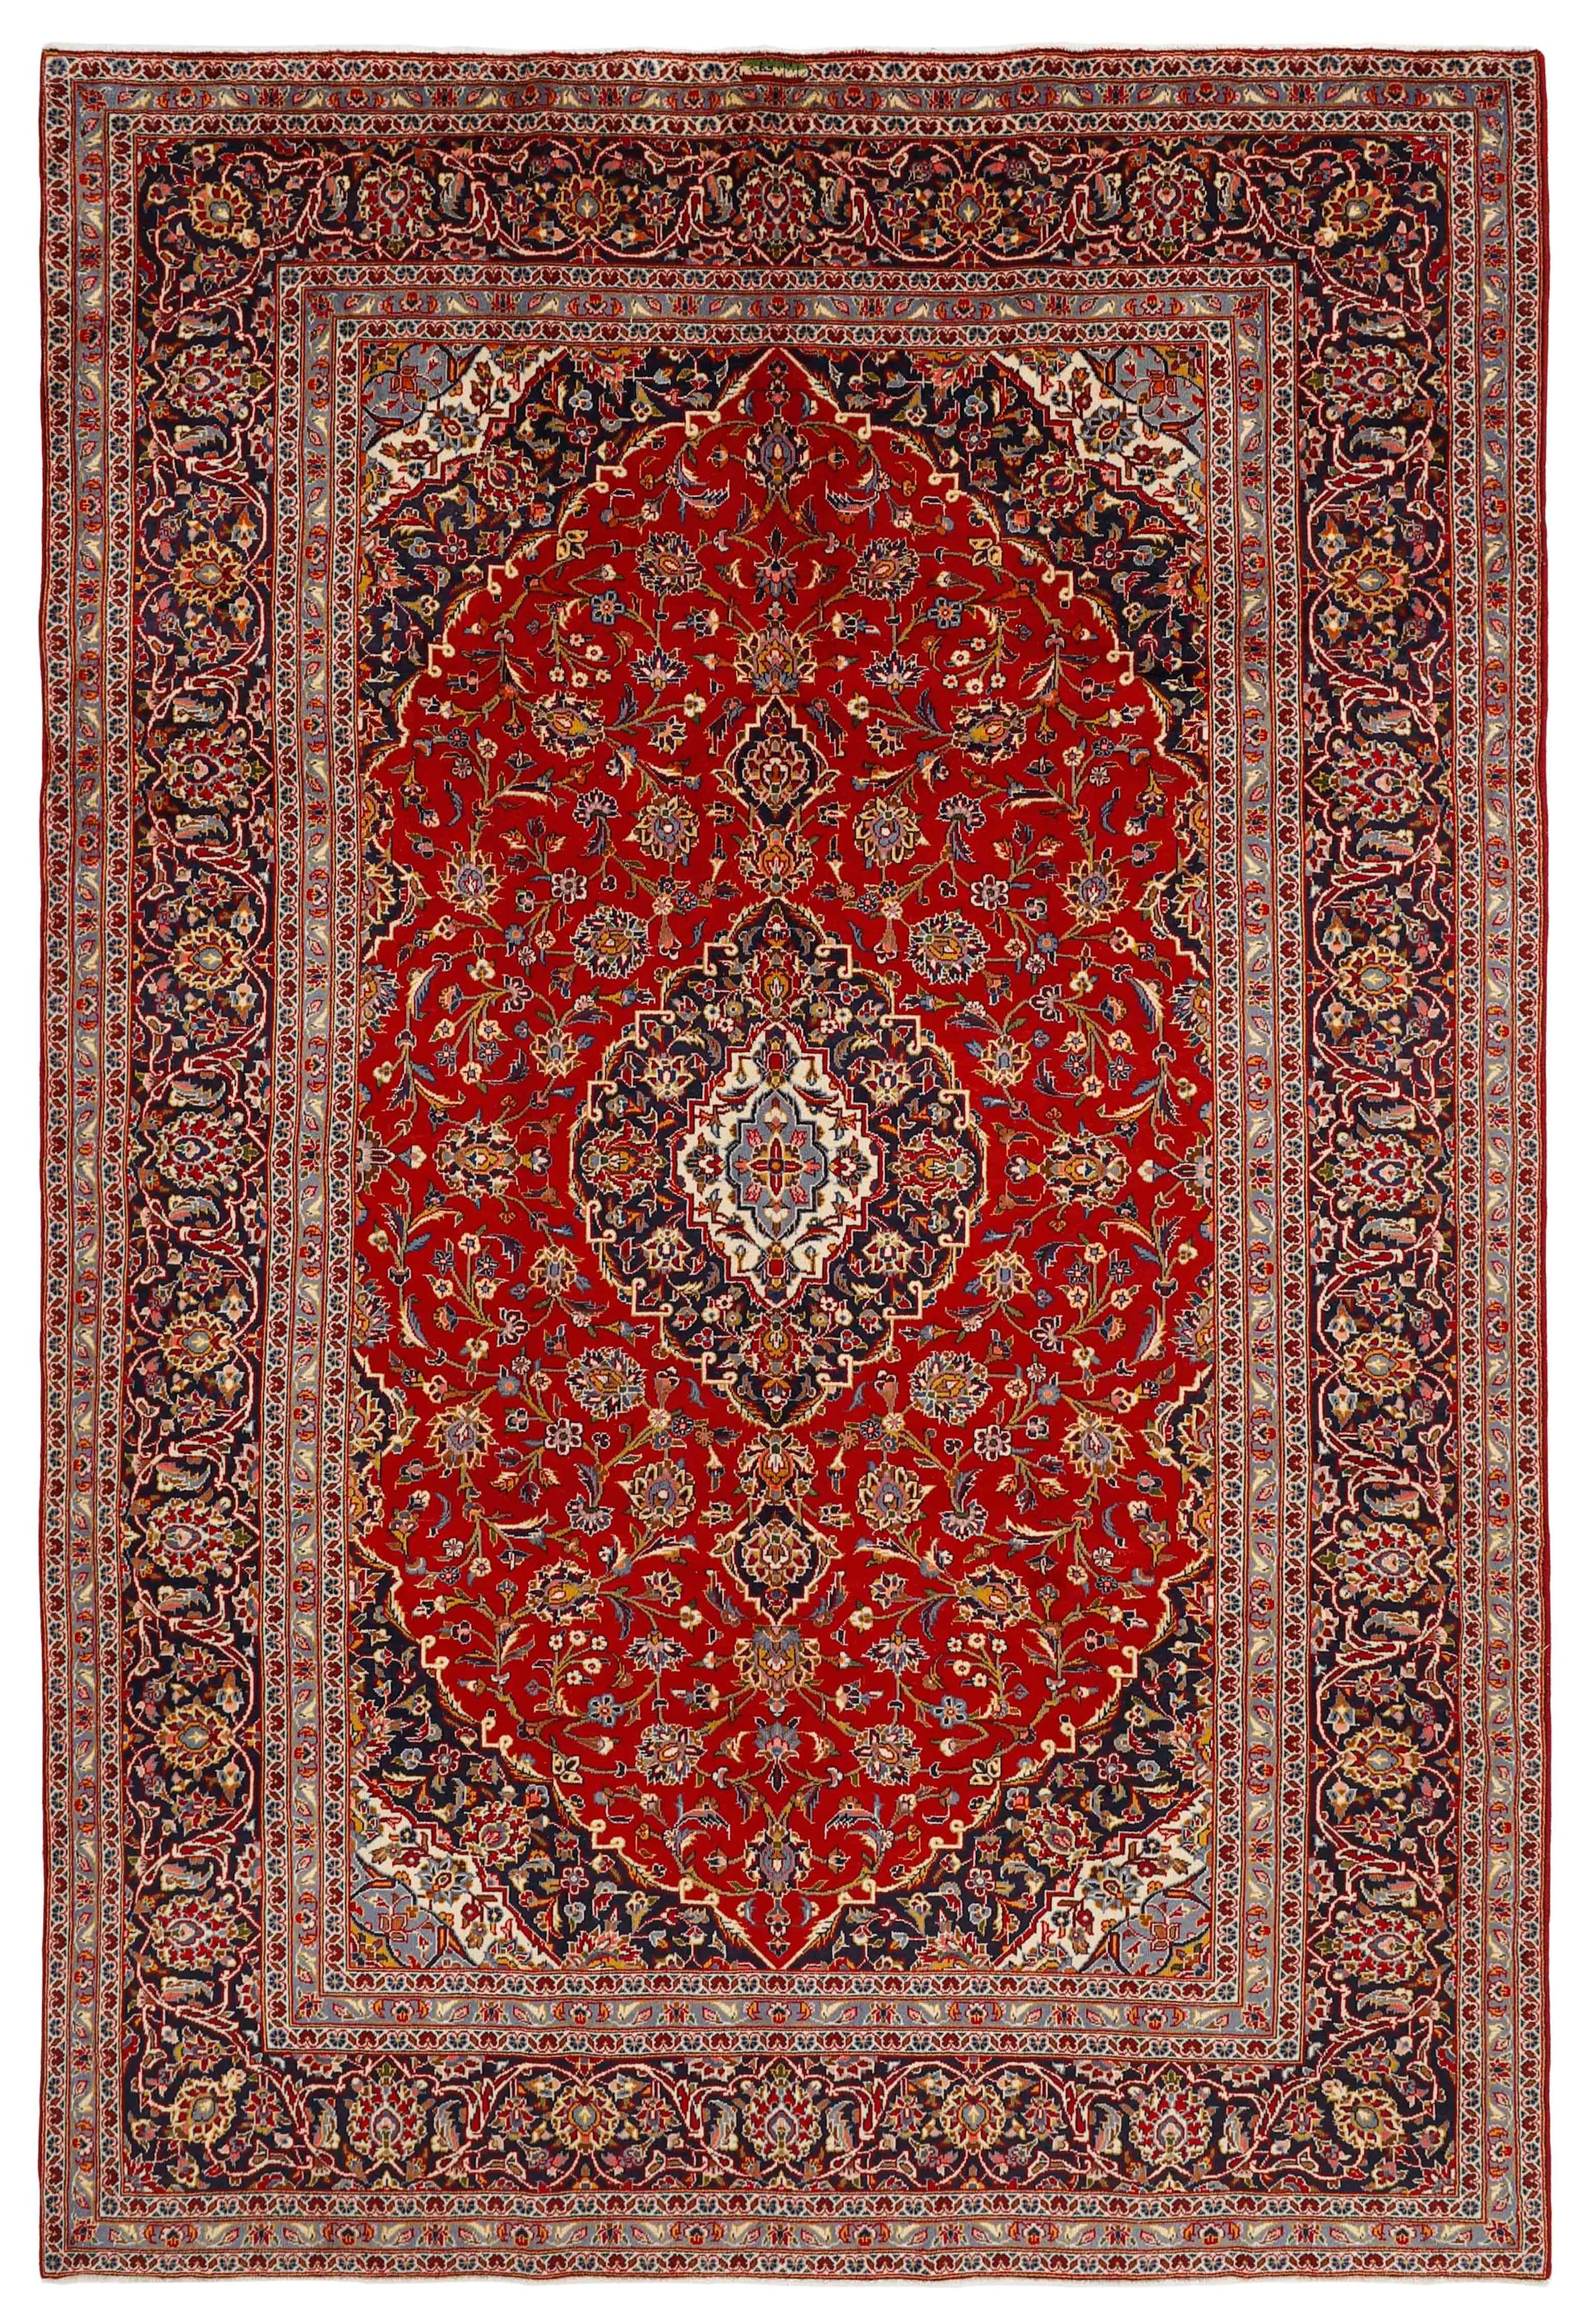 Authentic persian rug with traditional floral design in red and blue